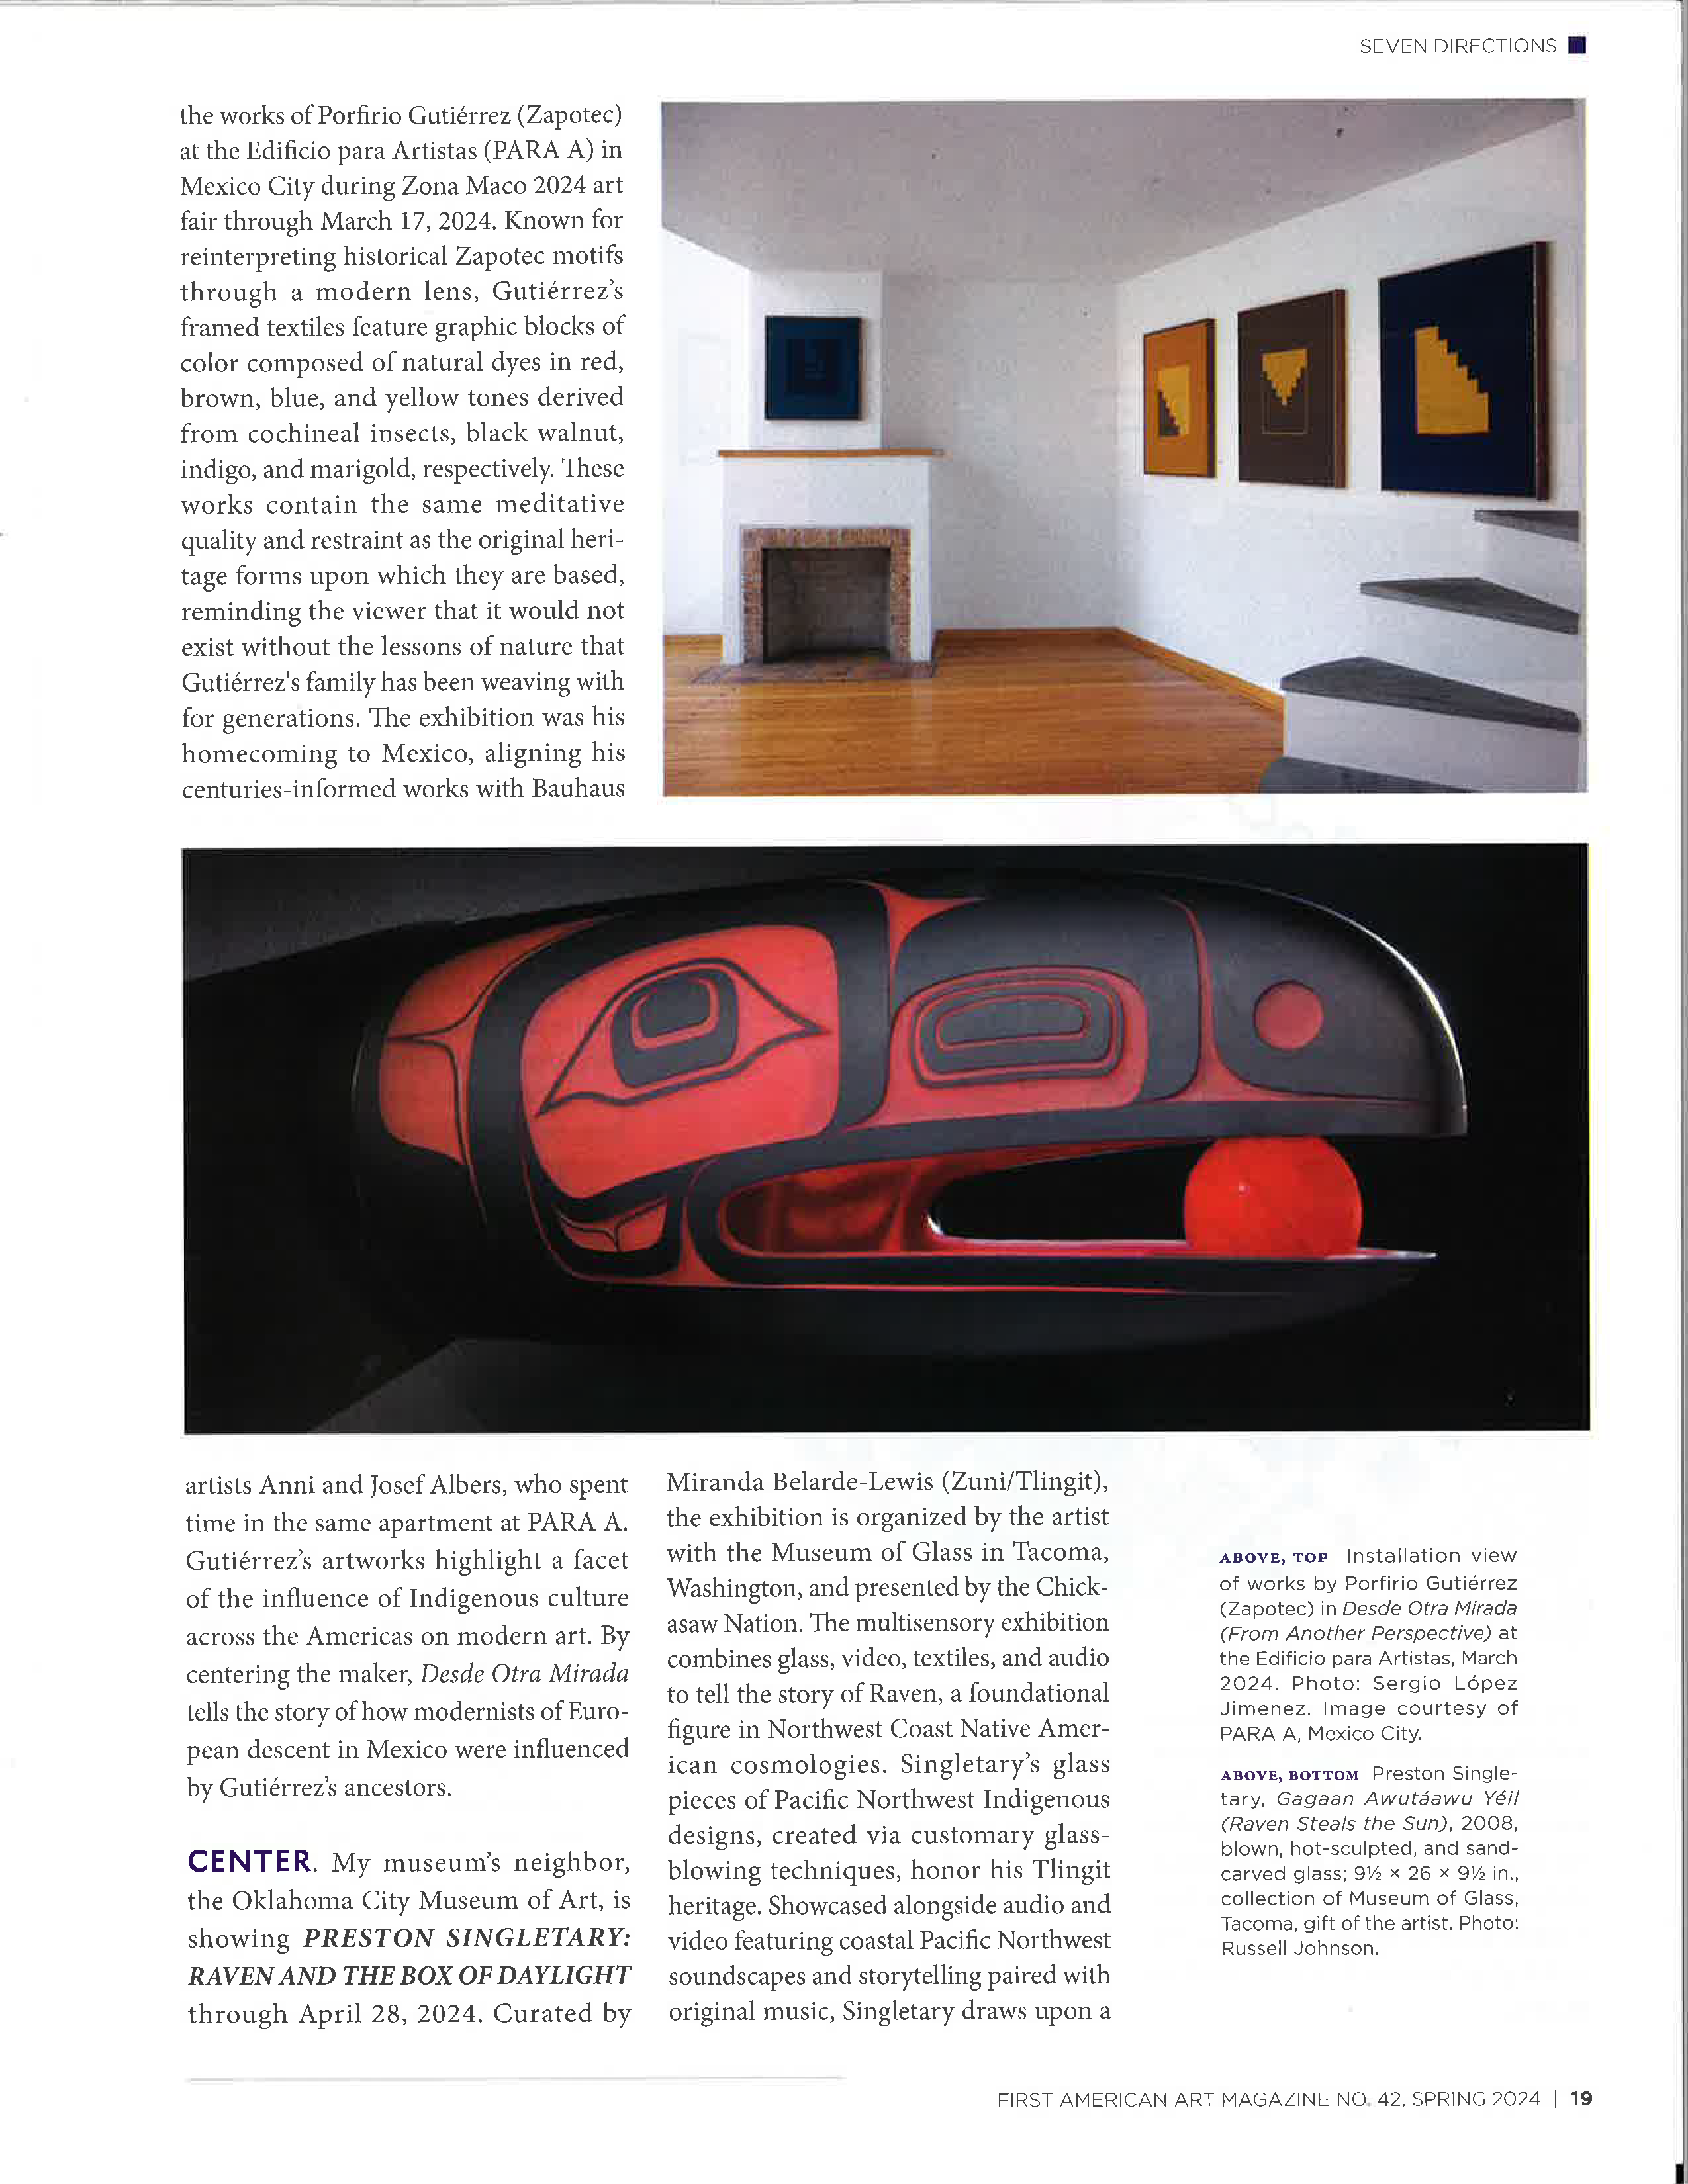 A magazine article with photos of geometric works in neutral tones displayed in a living room-like space and a red and black glass sculpture of a stylized raven with a red ball in its beak